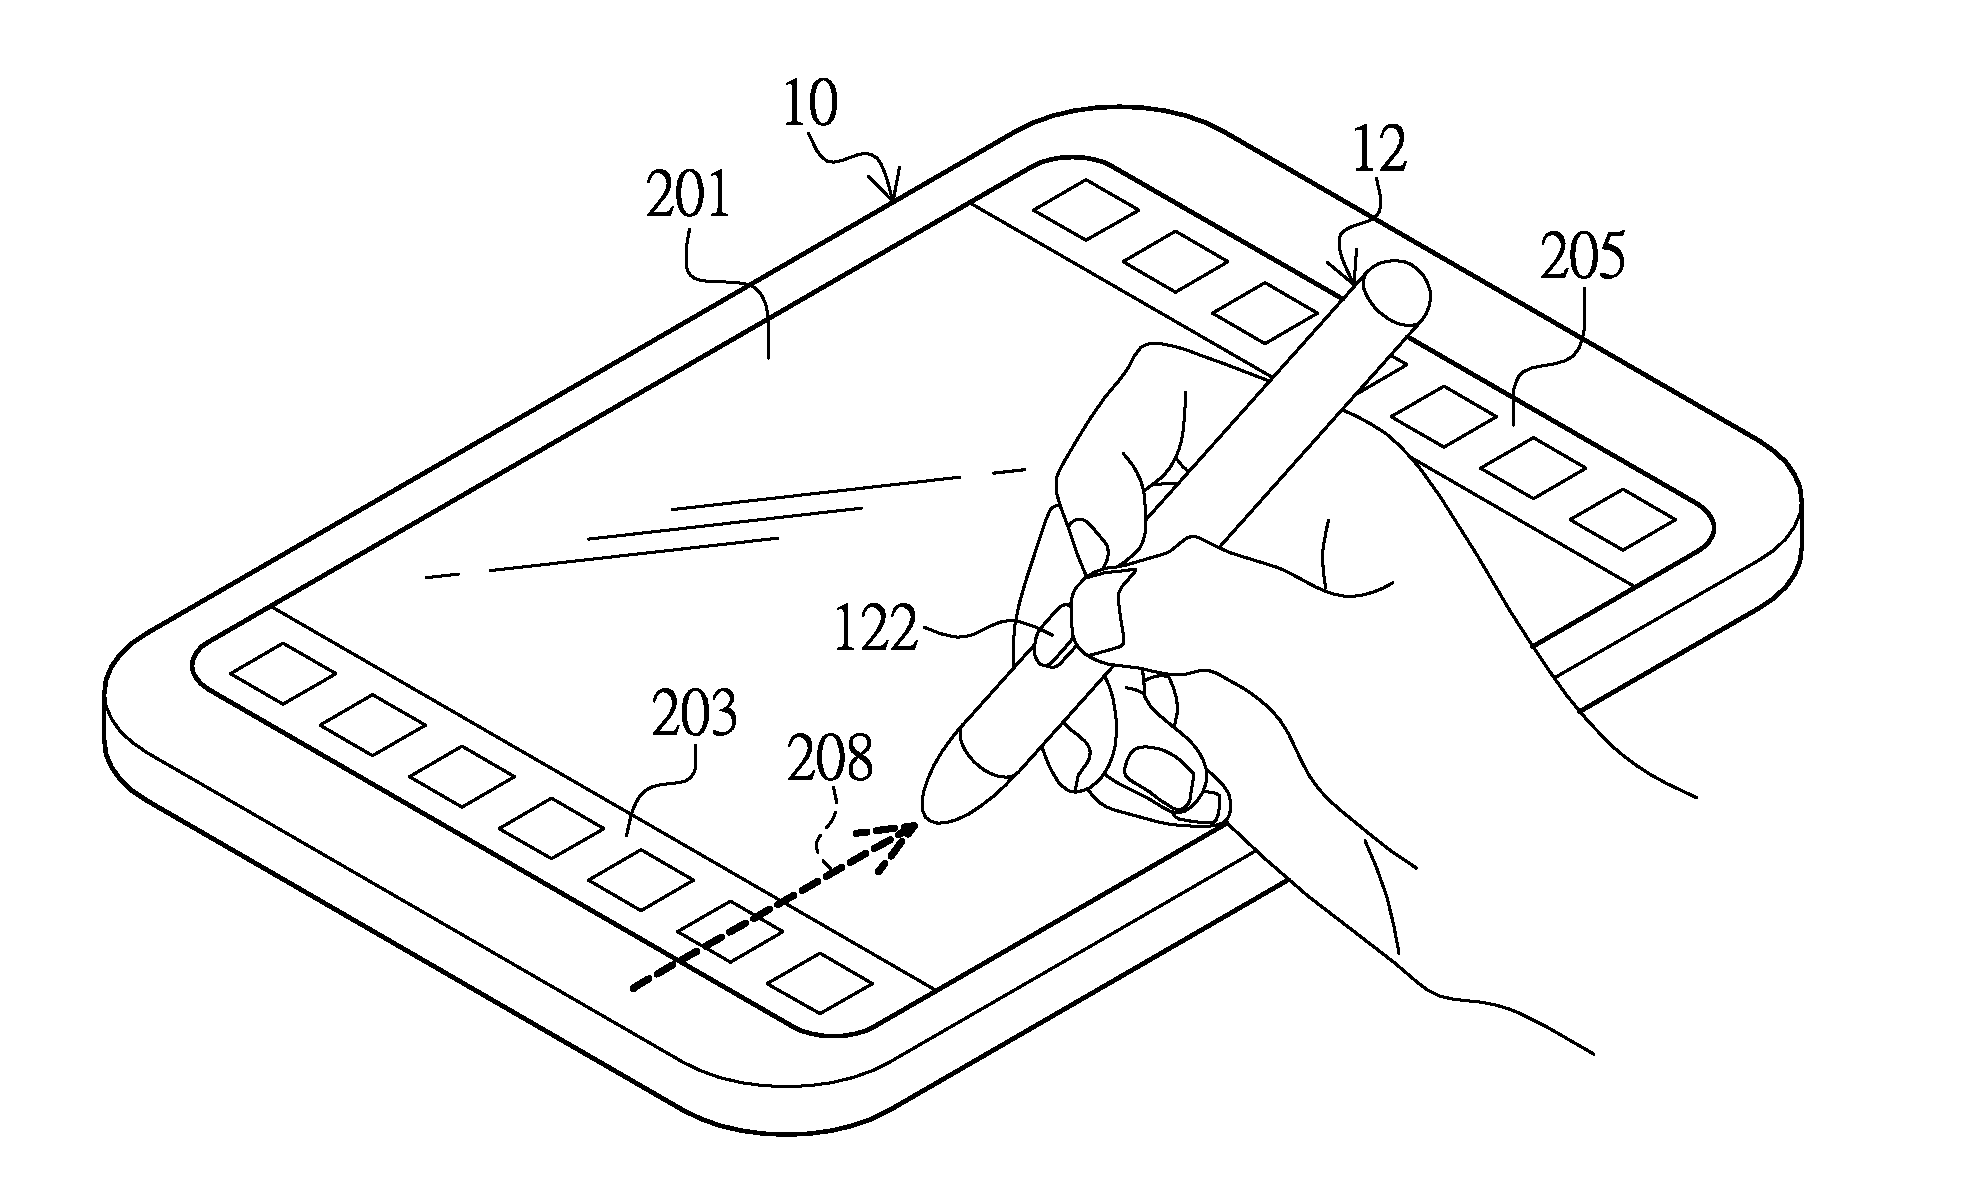 Touch-sensitive panel apparatus, control circuit and method for scanning touch event